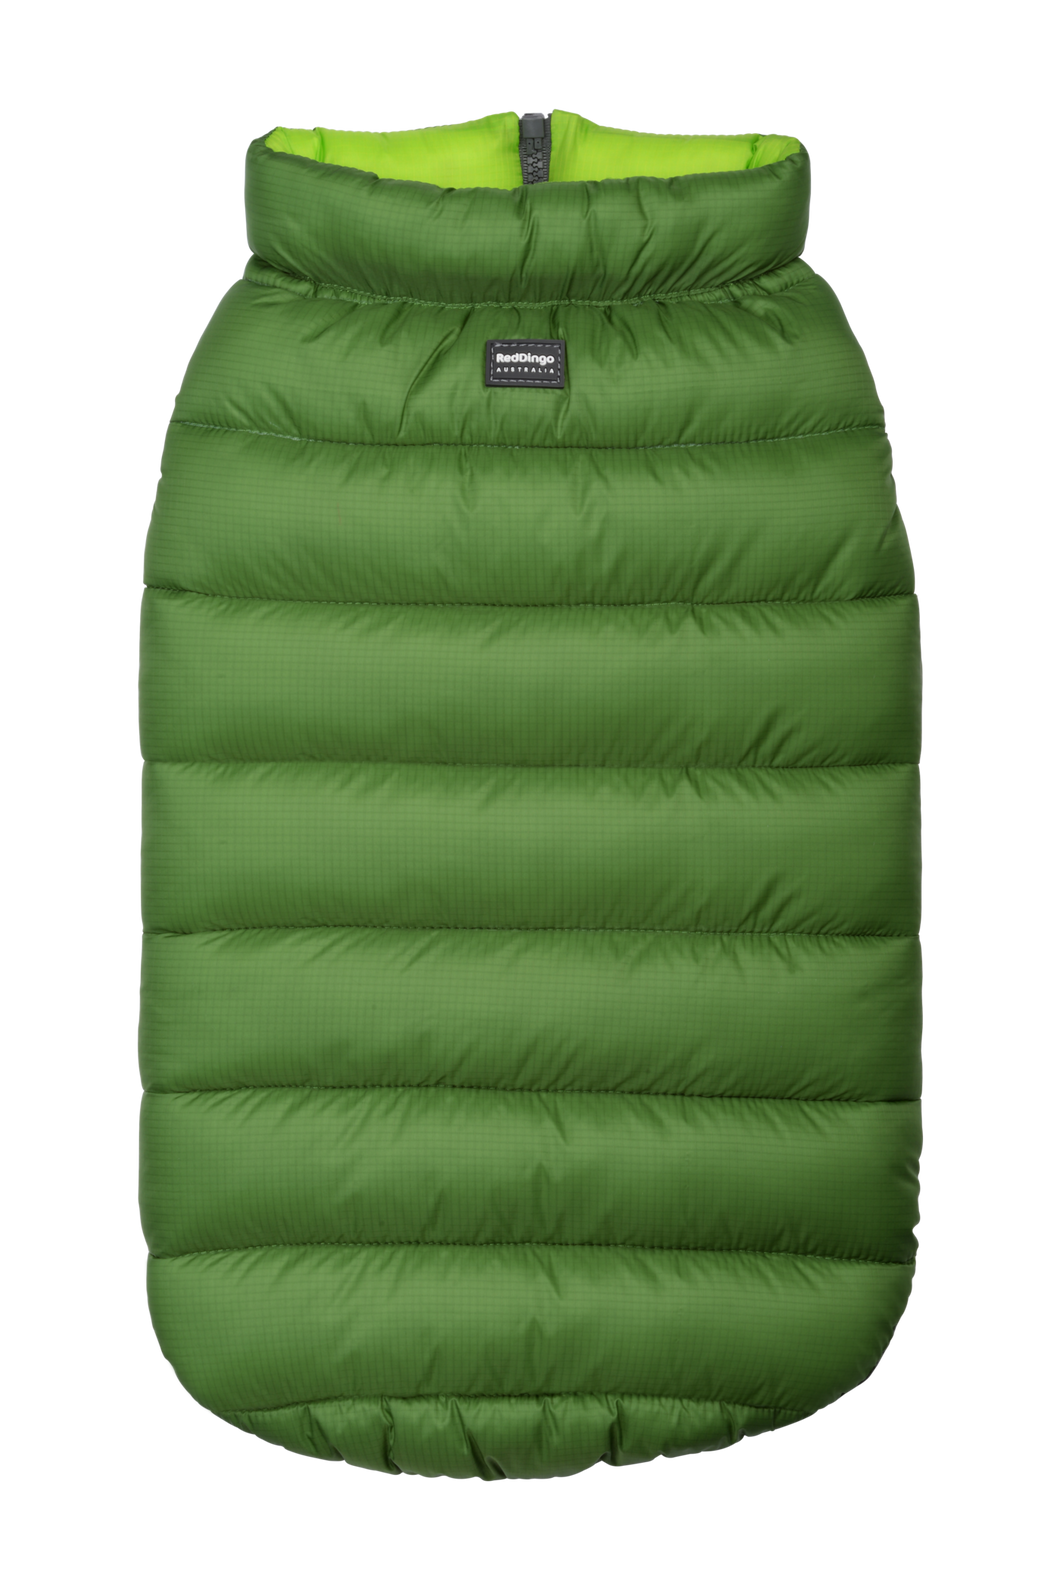 Neo-Fit Puffer Jacket - Green / Lime Reversible